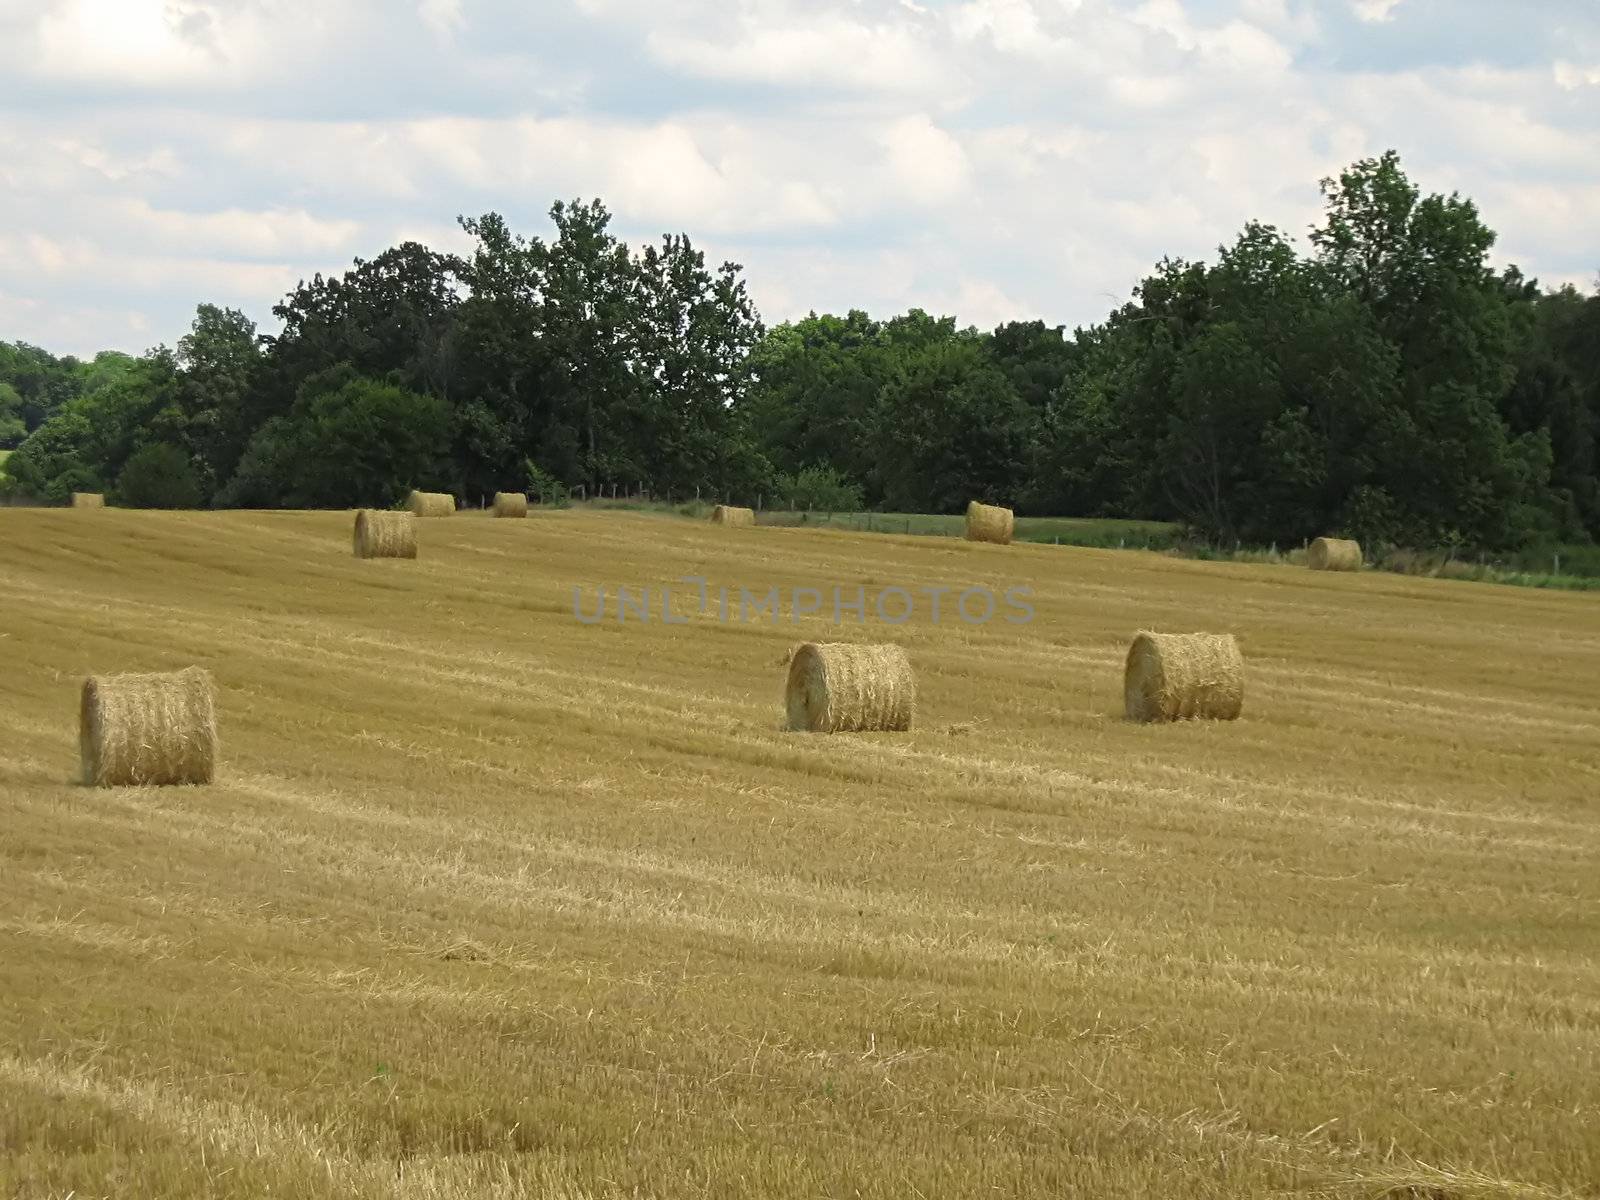 A photograph of hay bales in a field.